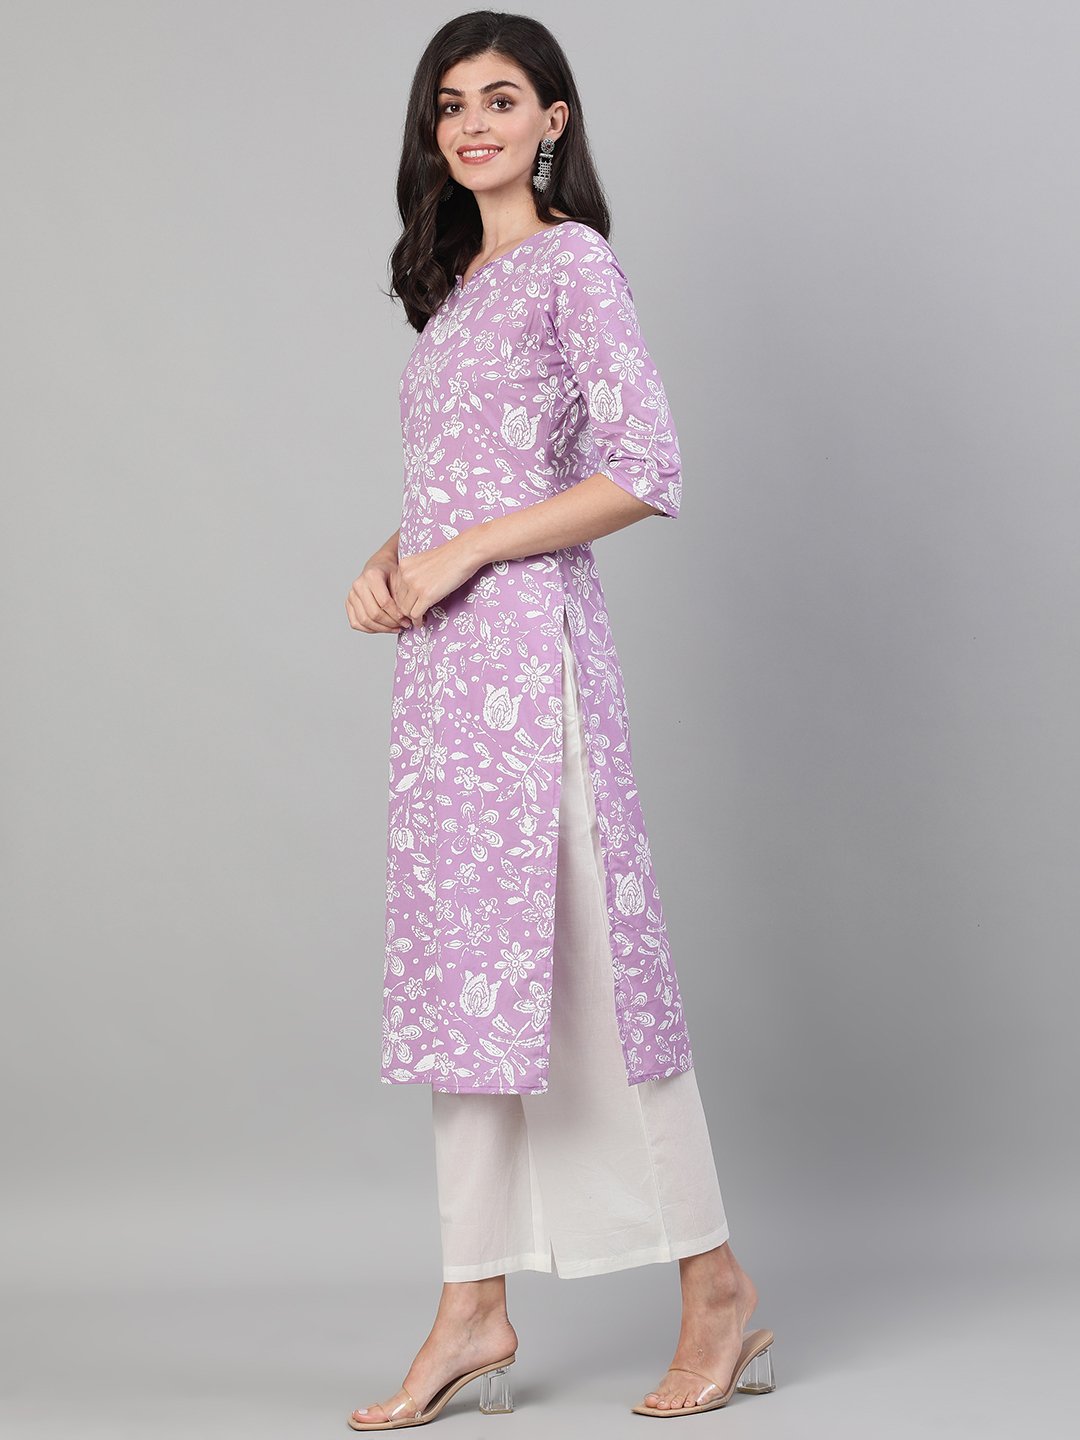 Women's Lavender Calf Length Three-Quarter Sleeves Straight Floral Printed Cotton Kurta With Face Mask - Nayo Clothing